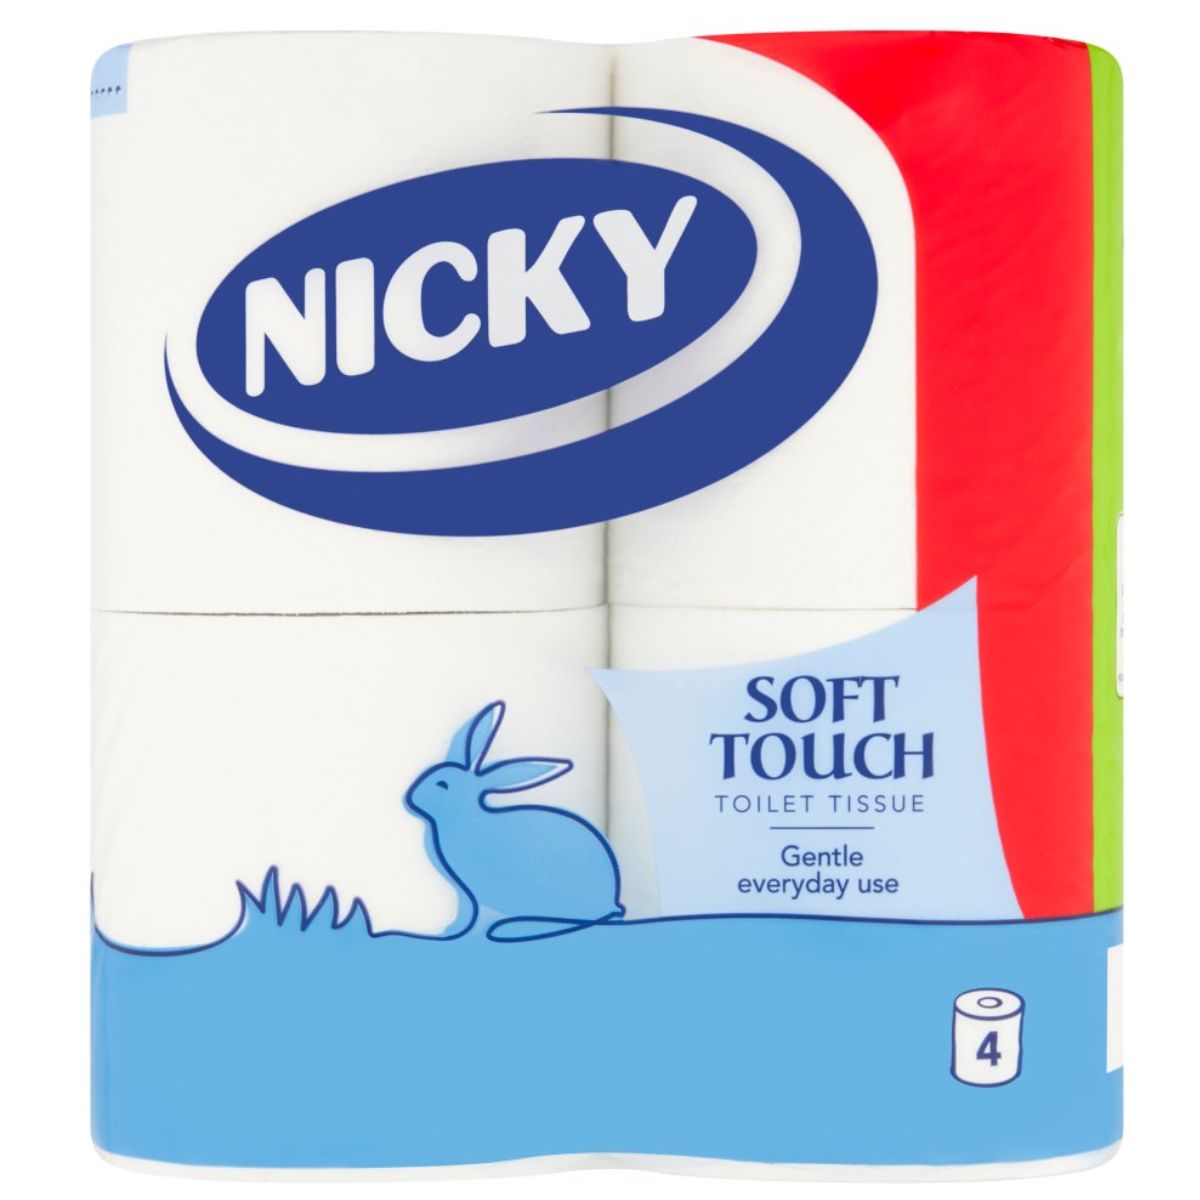 Nicky - Soft Touch Toilet Tissue - 4pcs toilet paper.